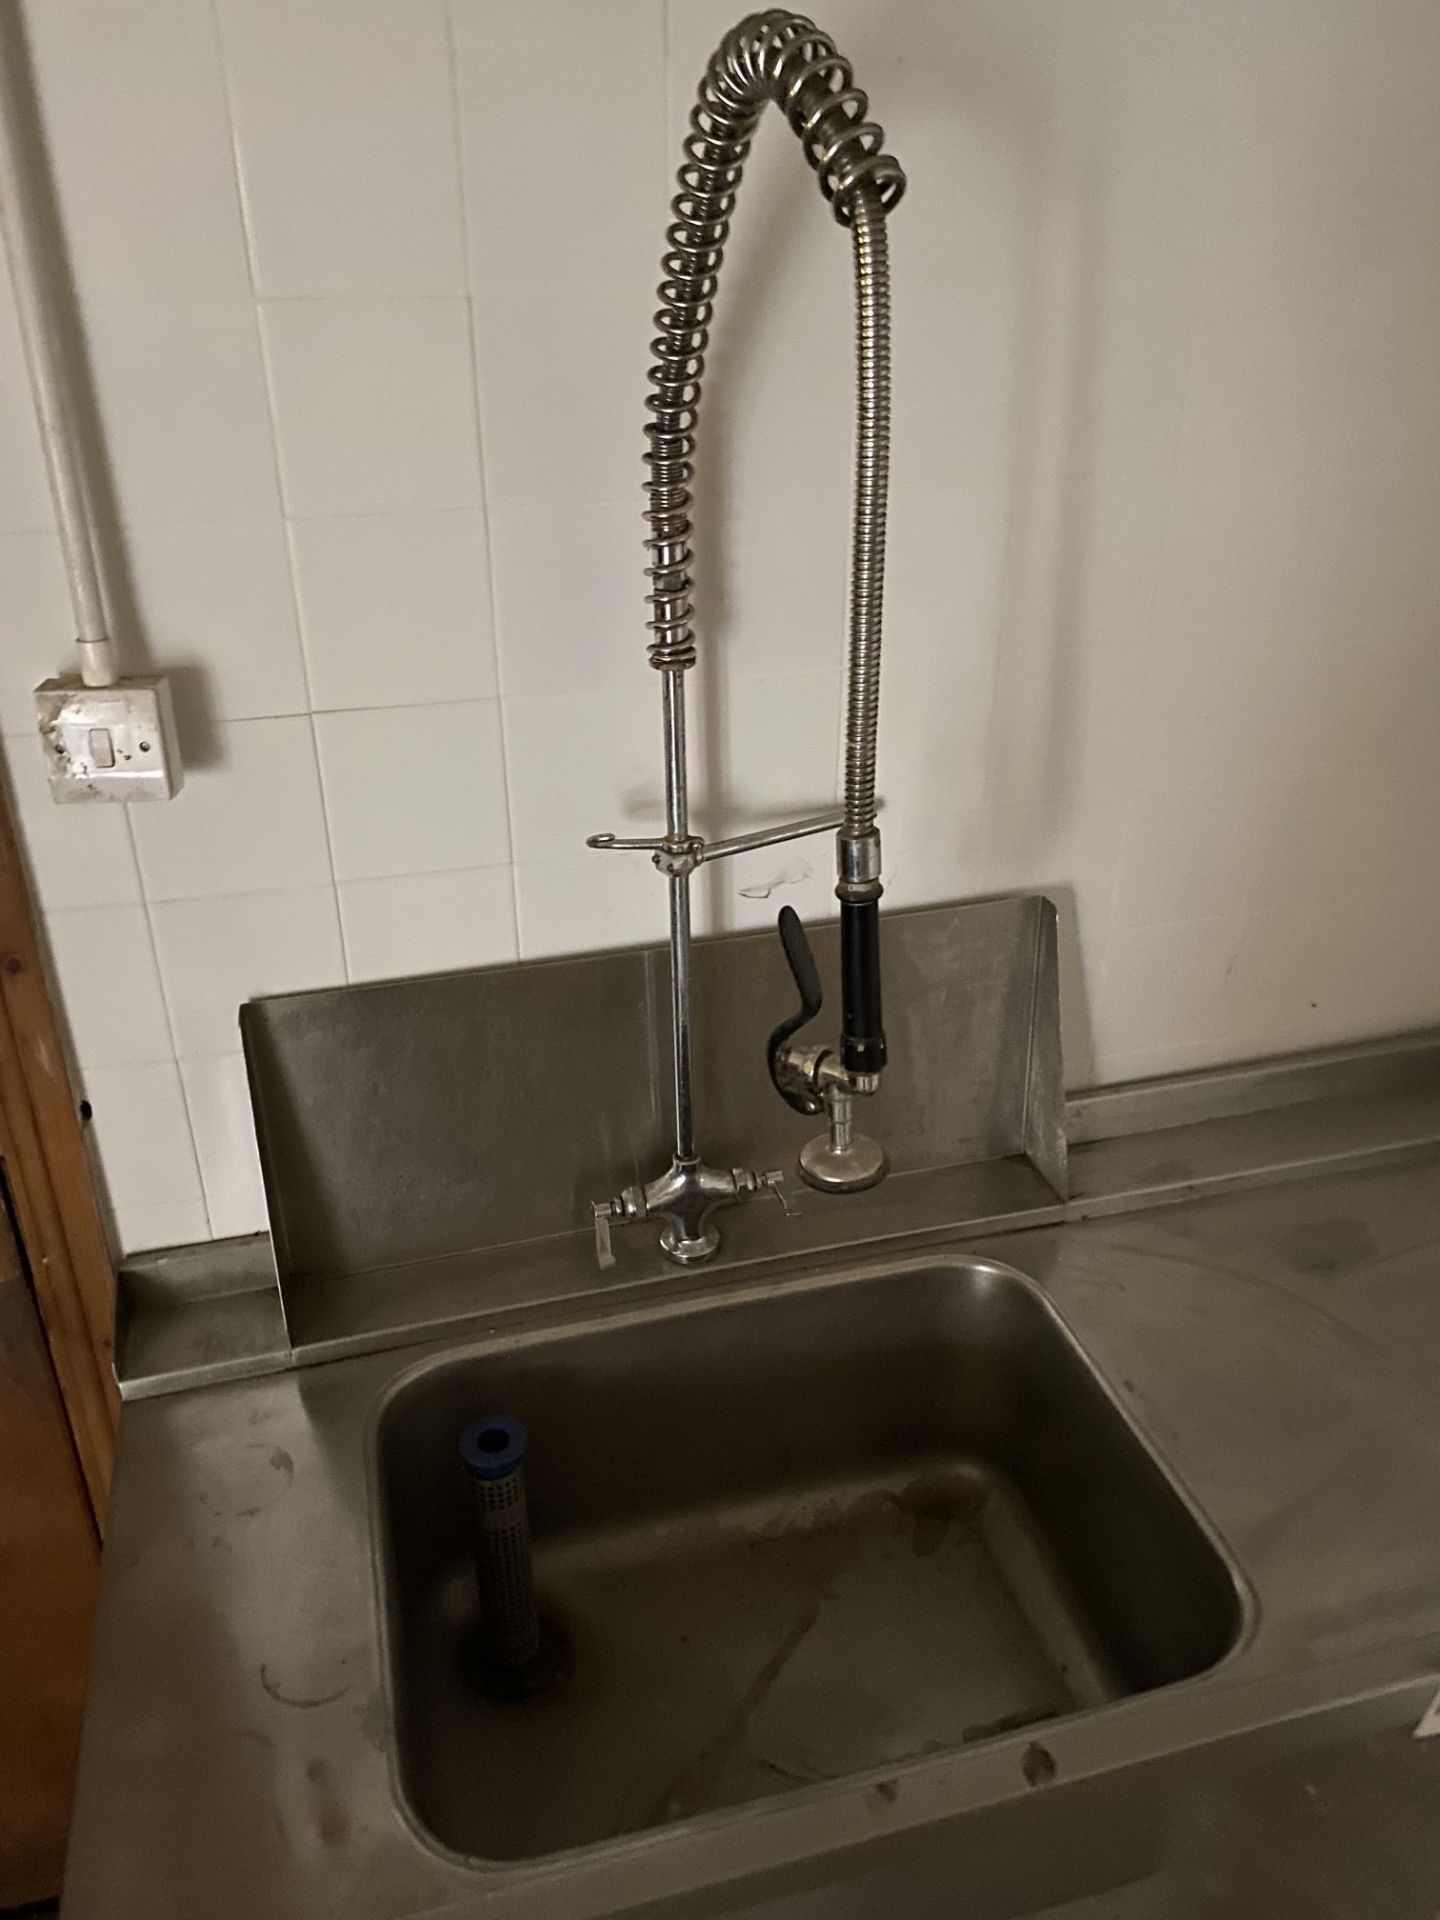 Stainless Steel Sink Unit, with rinsing attachment - Image 2 of 2